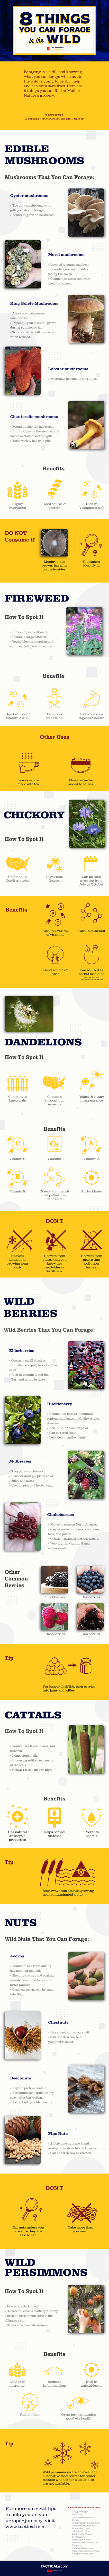 things to forage in the wild infographic